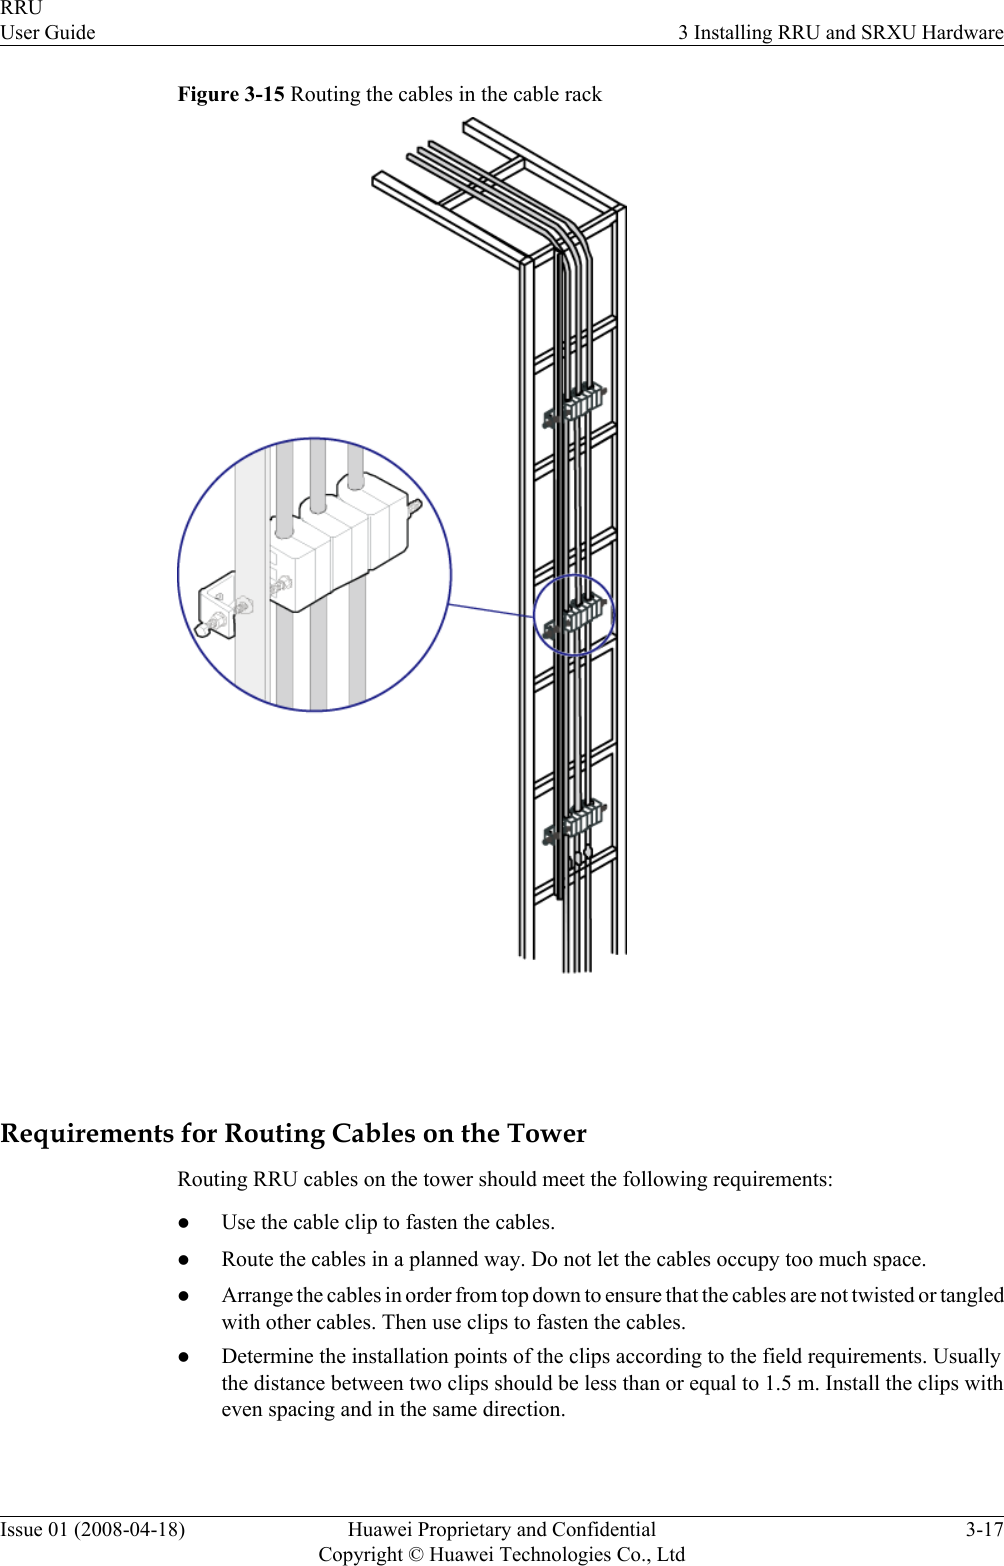 Figure 3-15 Routing the cables in the cable rackRequirements for Routing Cables on the TowerRouting RRU cables on the tower should meet the following requirements:lUse the cable clip to fasten the cables.lRoute the cables in a planned way. Do not let the cables occupy too much space.lArrange the cables in order from top down to ensure that the cables are not twisted or tangledwith other cables. Then use clips to fasten the cables.lDetermine the installation points of the clips according to the field requirements. Usuallythe distance between two clips should be less than or equal to 1.5 m. Install the clips witheven spacing and in the same direction.RRUUser Guide 3 Installing RRU and SRXU HardwareIssue 01 (2008-04-18) Huawei Proprietary and ConfidentialCopyright © Huawei Technologies Co., Ltd3-17